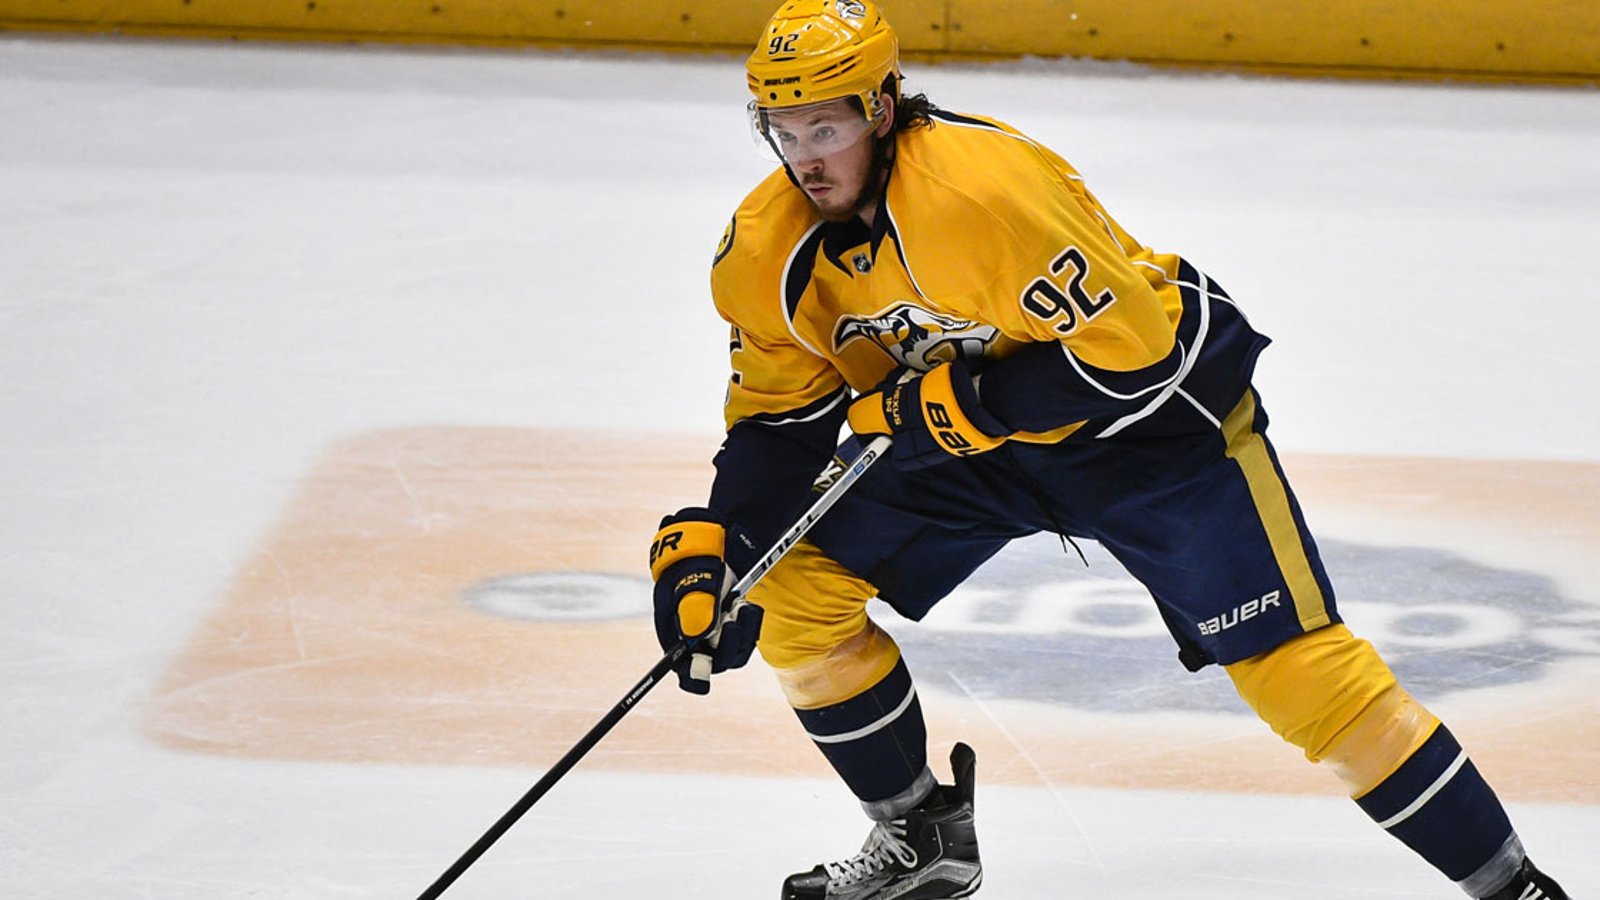 Injury report: Johansen's recovery after life-threatening ordeal